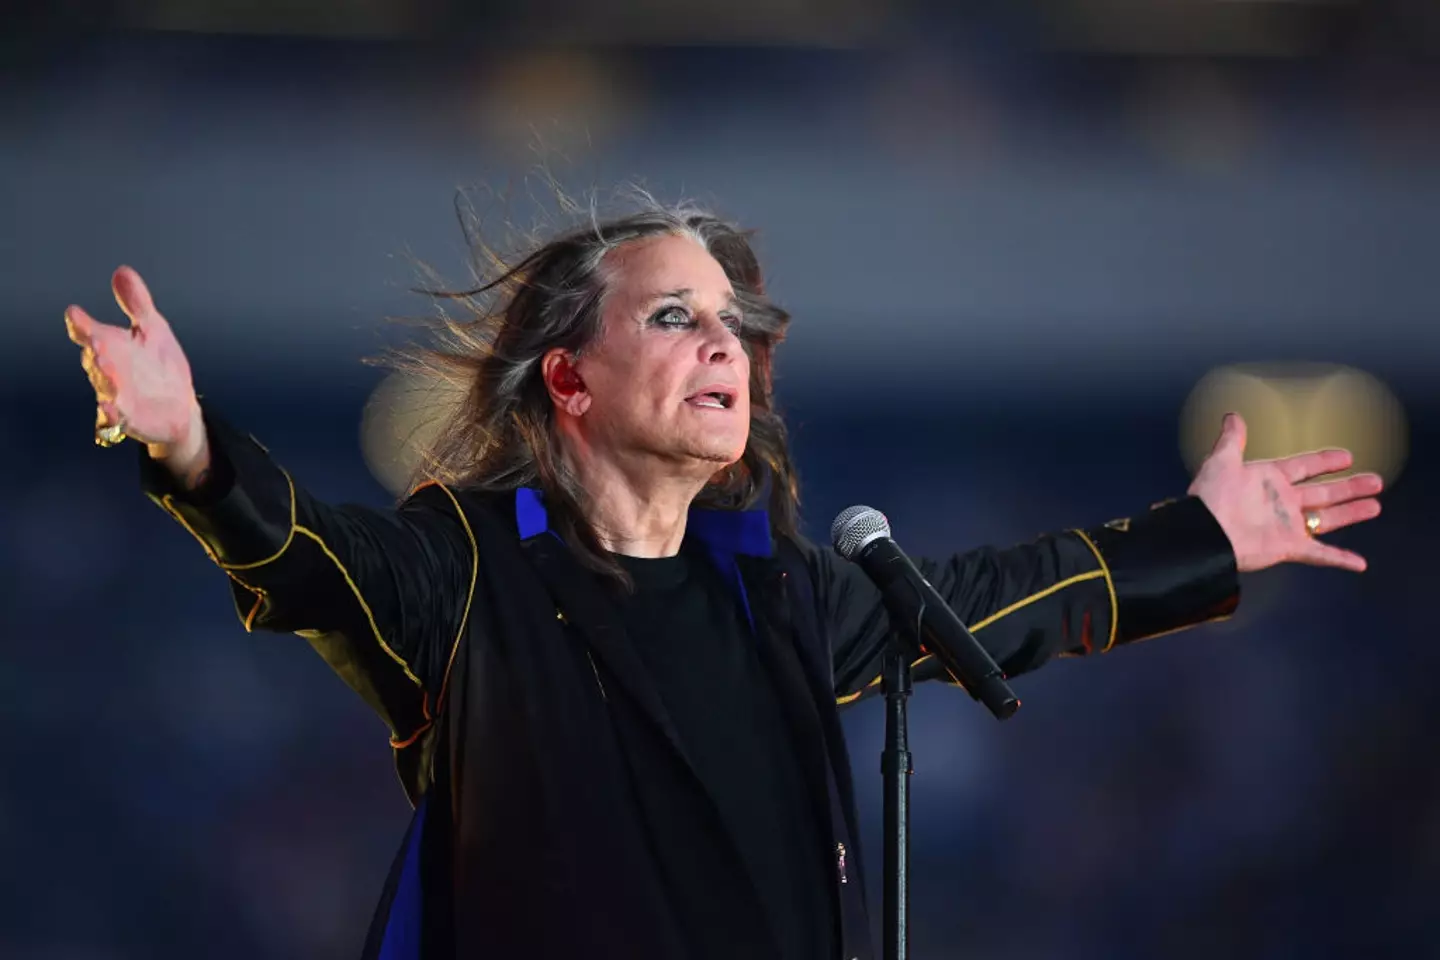 Ozzy Osbourne has opened up on his latest surgery, saying it went 'drastically wrong'.